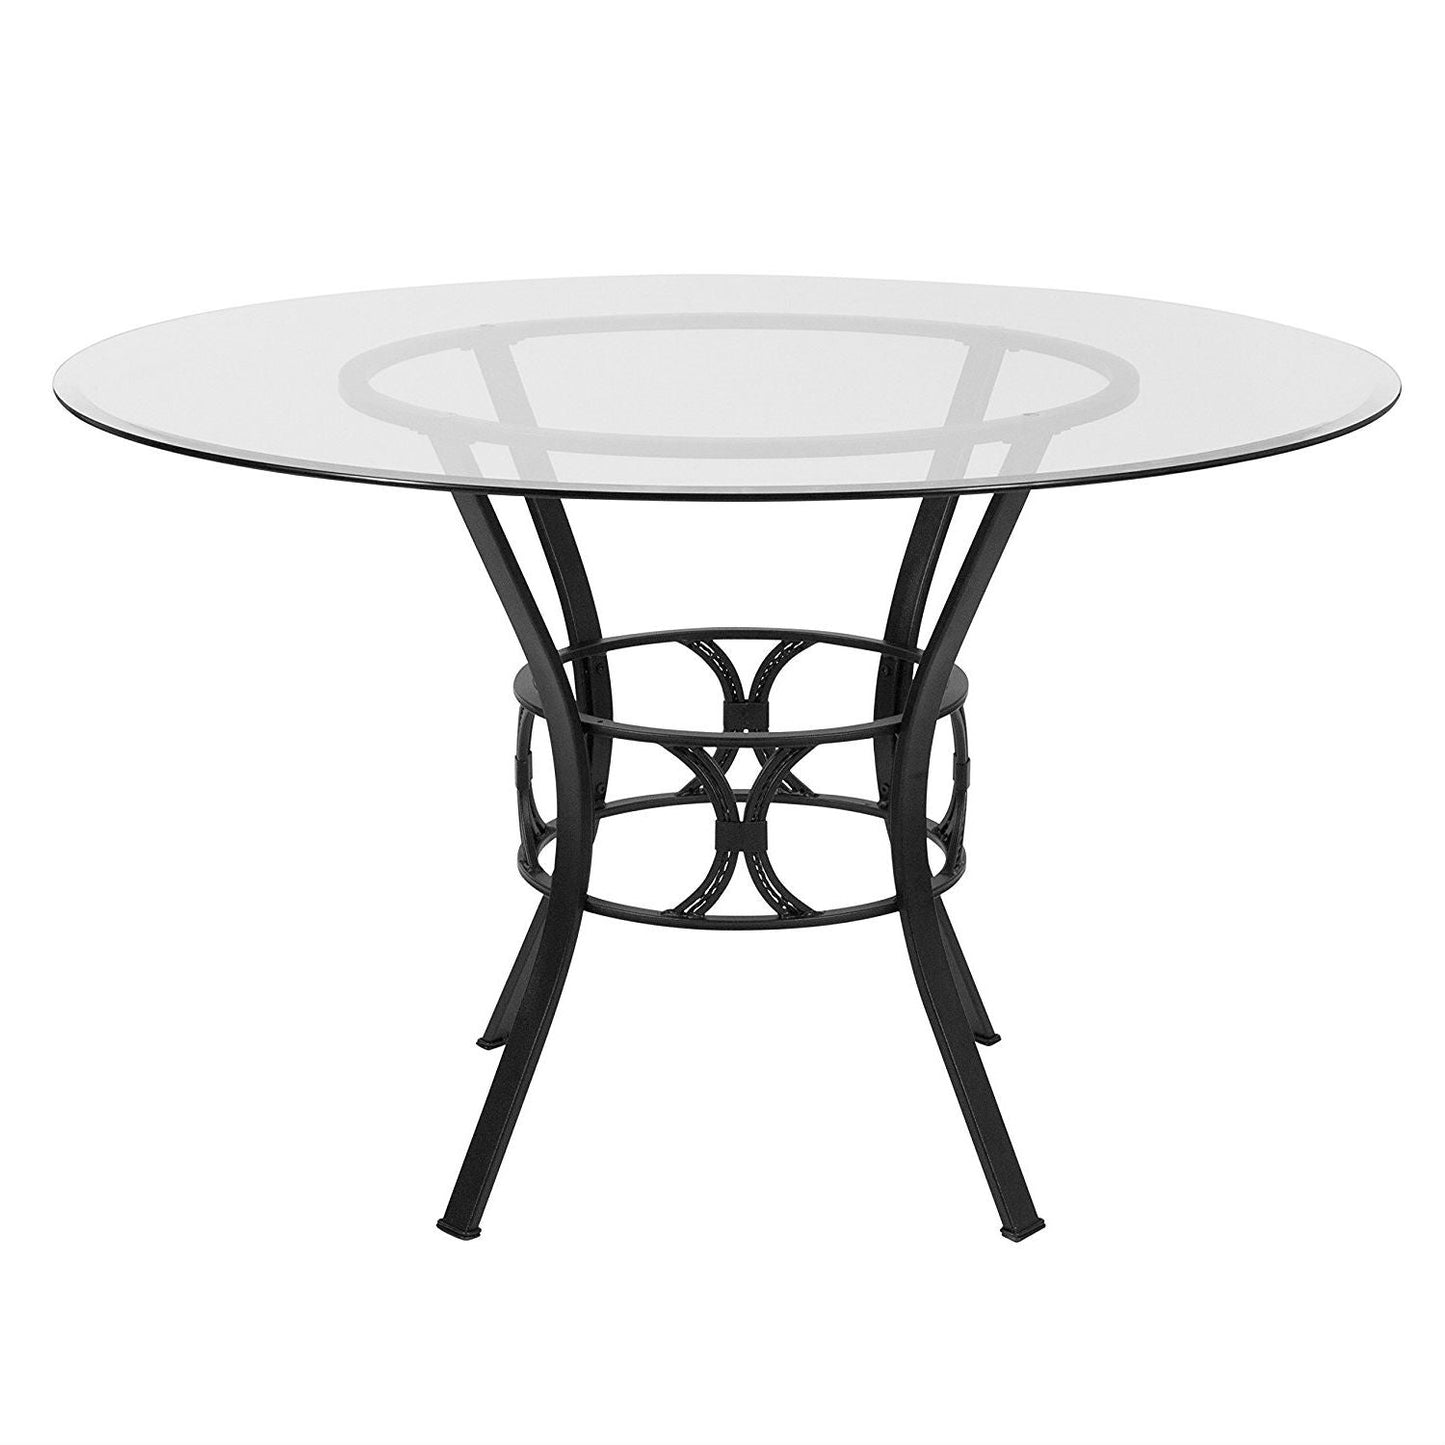 Dining > Dining Tables - Round 48-inch Clear Glass Dining Table With Black Metal Frame